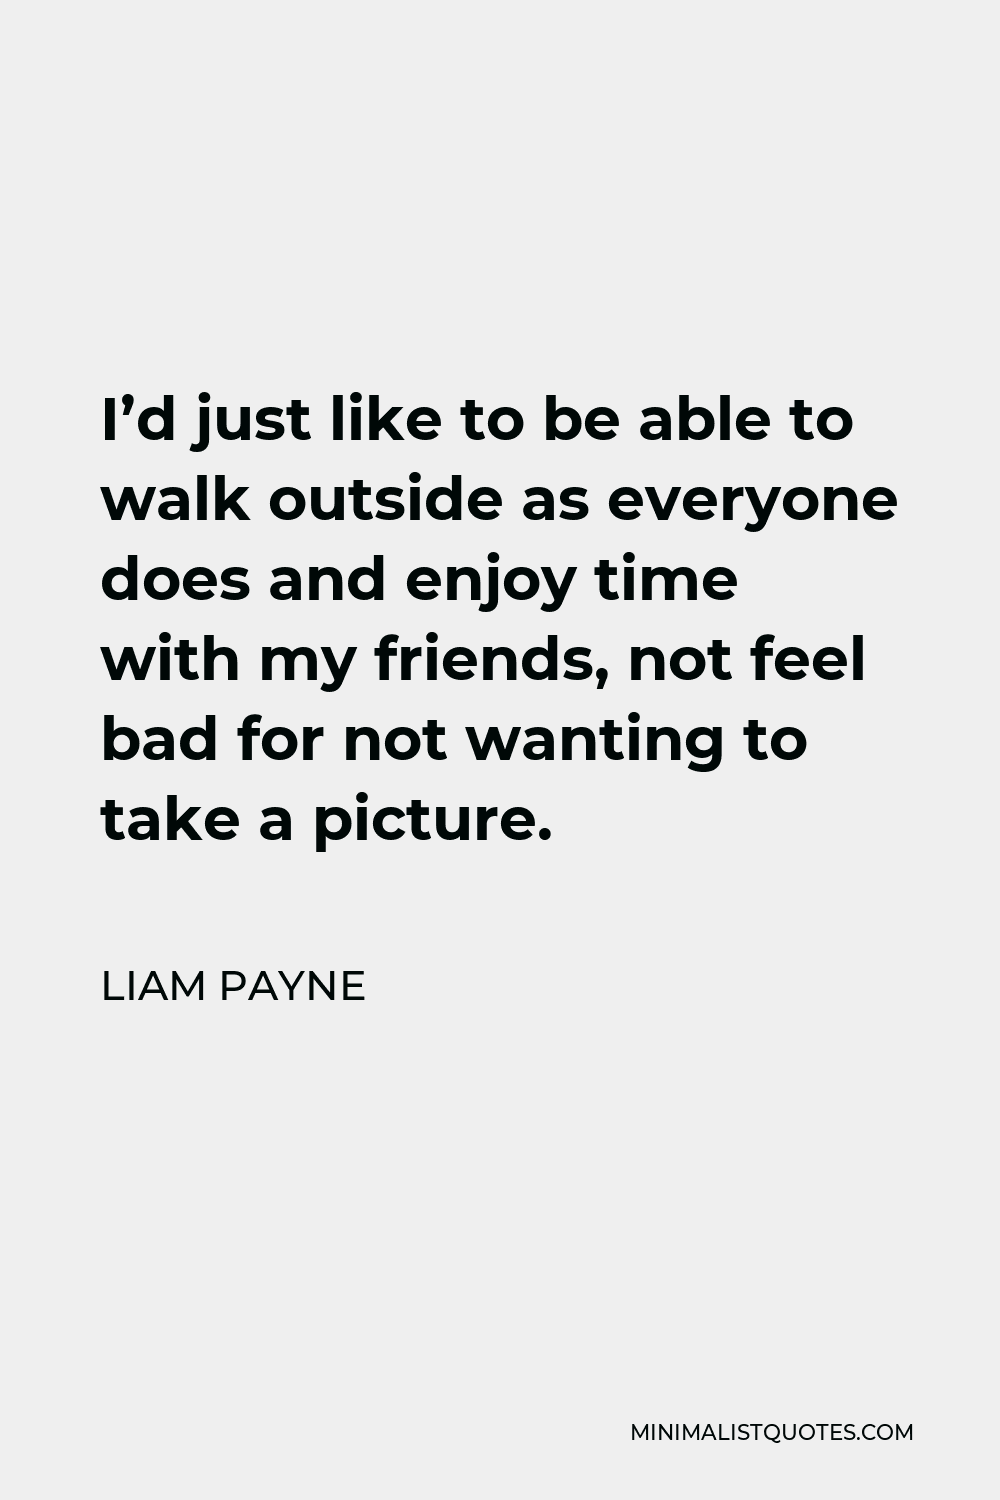 Liam Payne Quote - I’d just like to be able to walk outside as everyone does and enjoy time with my friends, not feel bad for not wanting to take a picture.